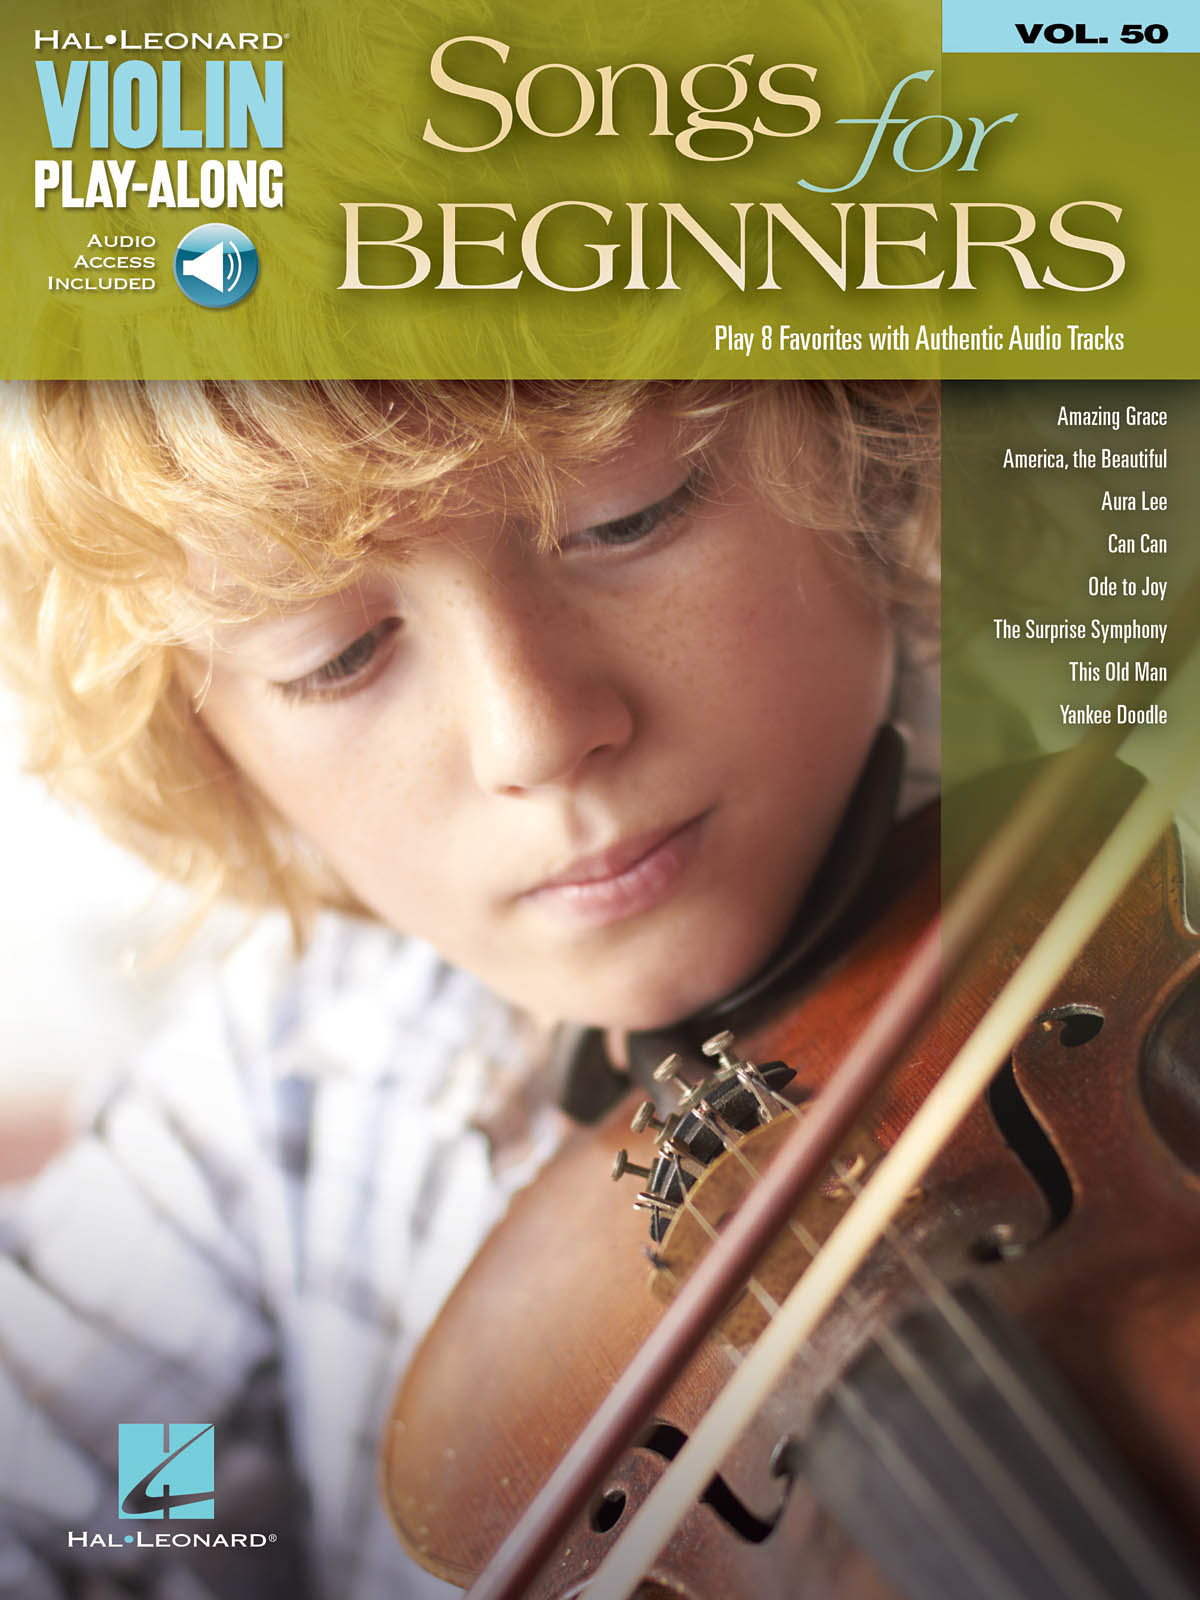 Violin Play-Along Volume 50:Songs for Beginners